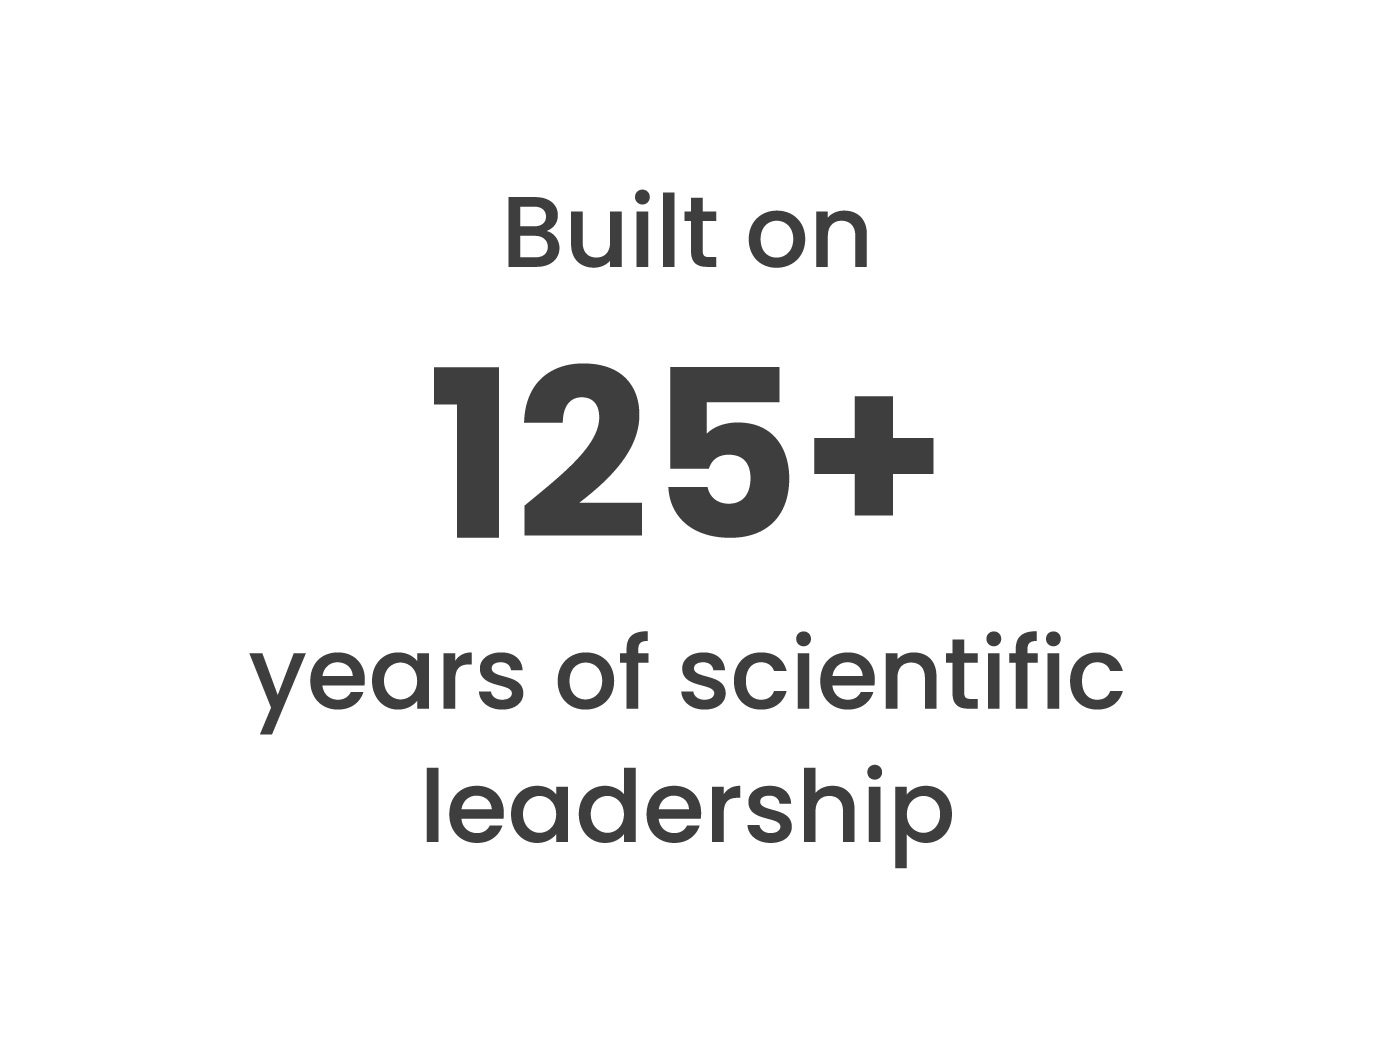 Built on more than 125 years of scientific leadership